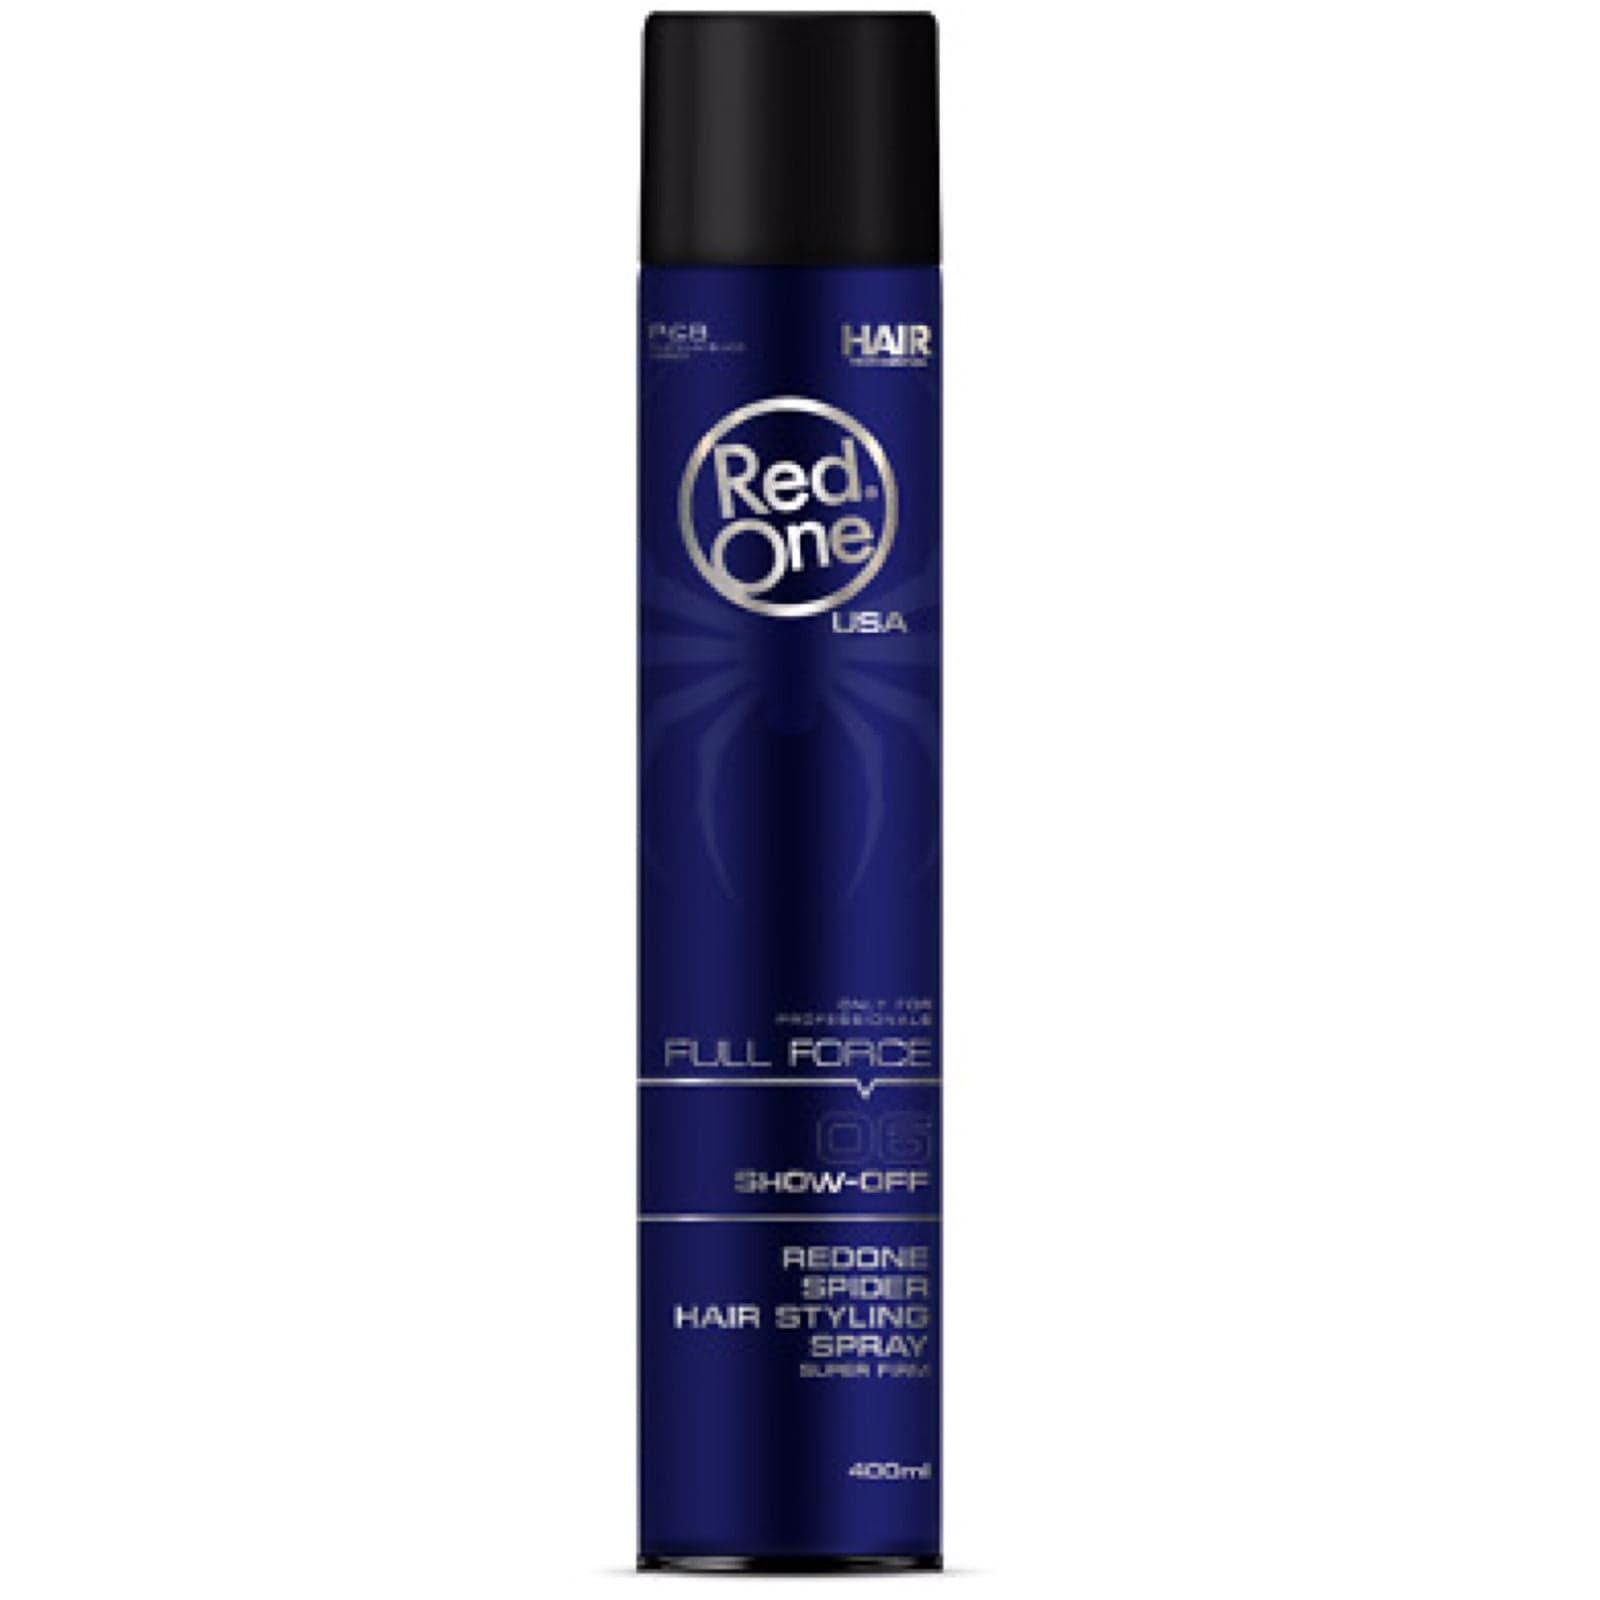 Redone Full Force Spider Hair Styling Spray Show Off 06 400ml